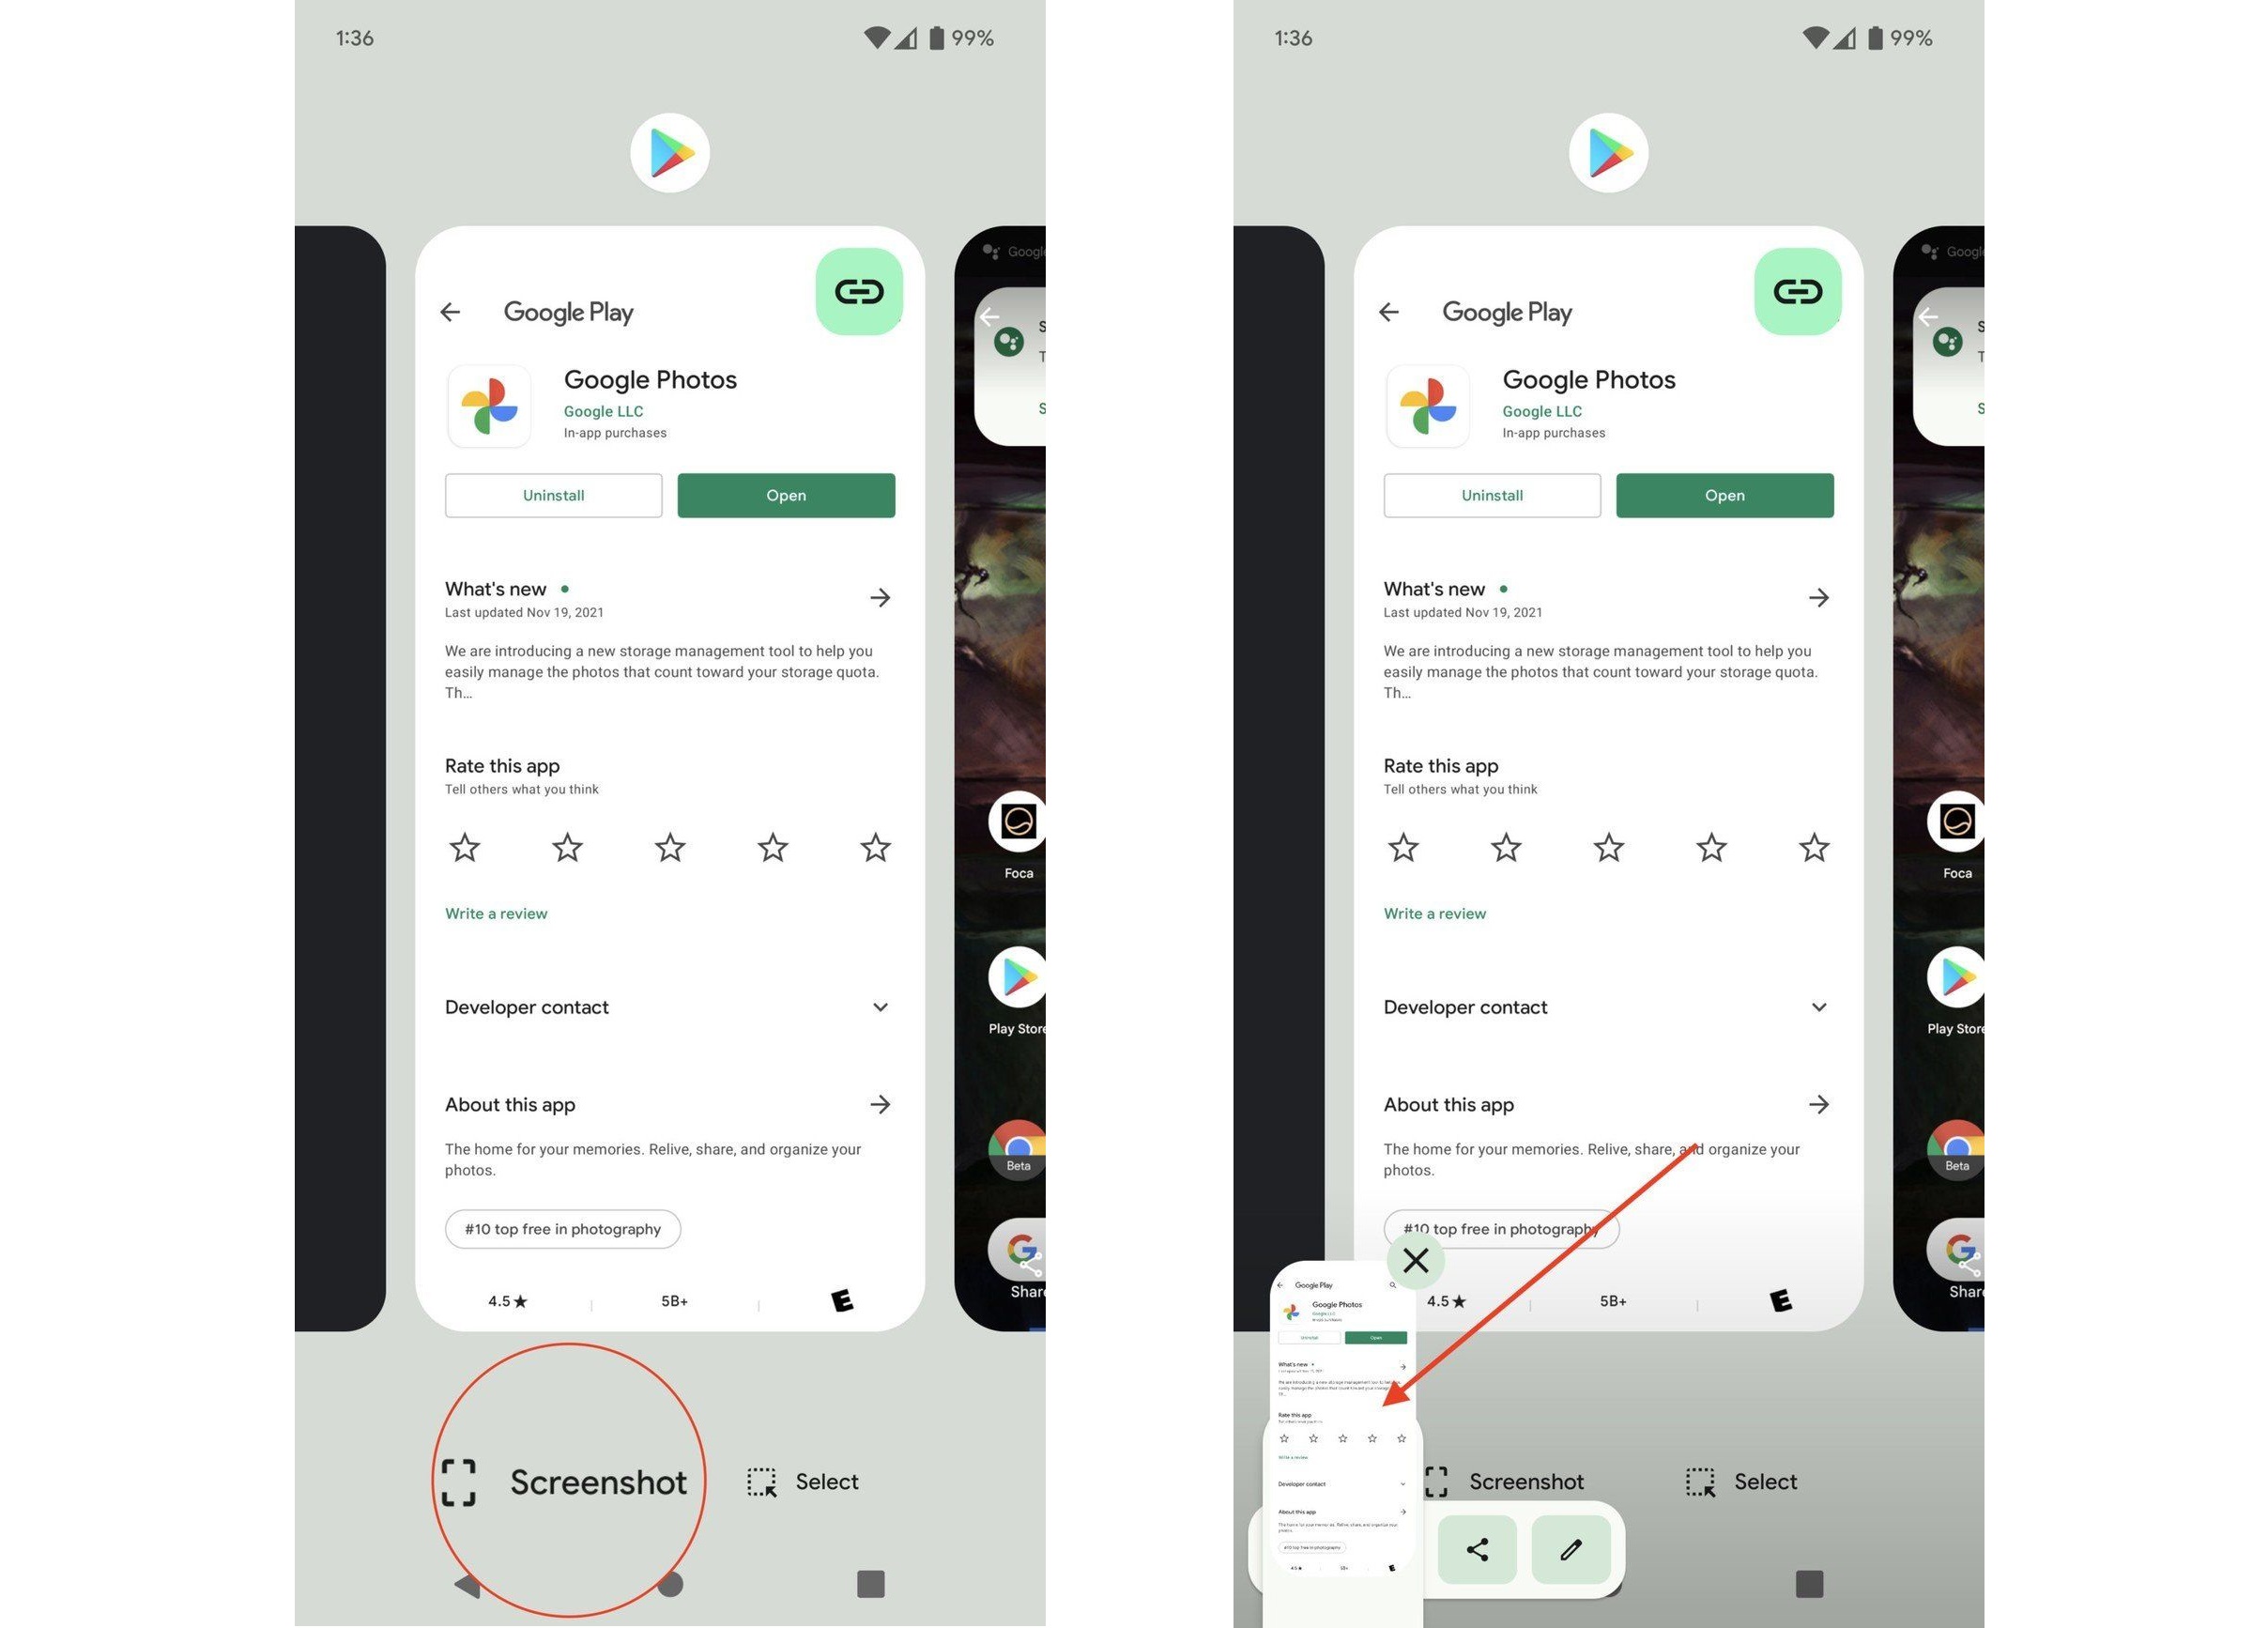 How to take a screenshot on the Google Pixel with gesture navigation